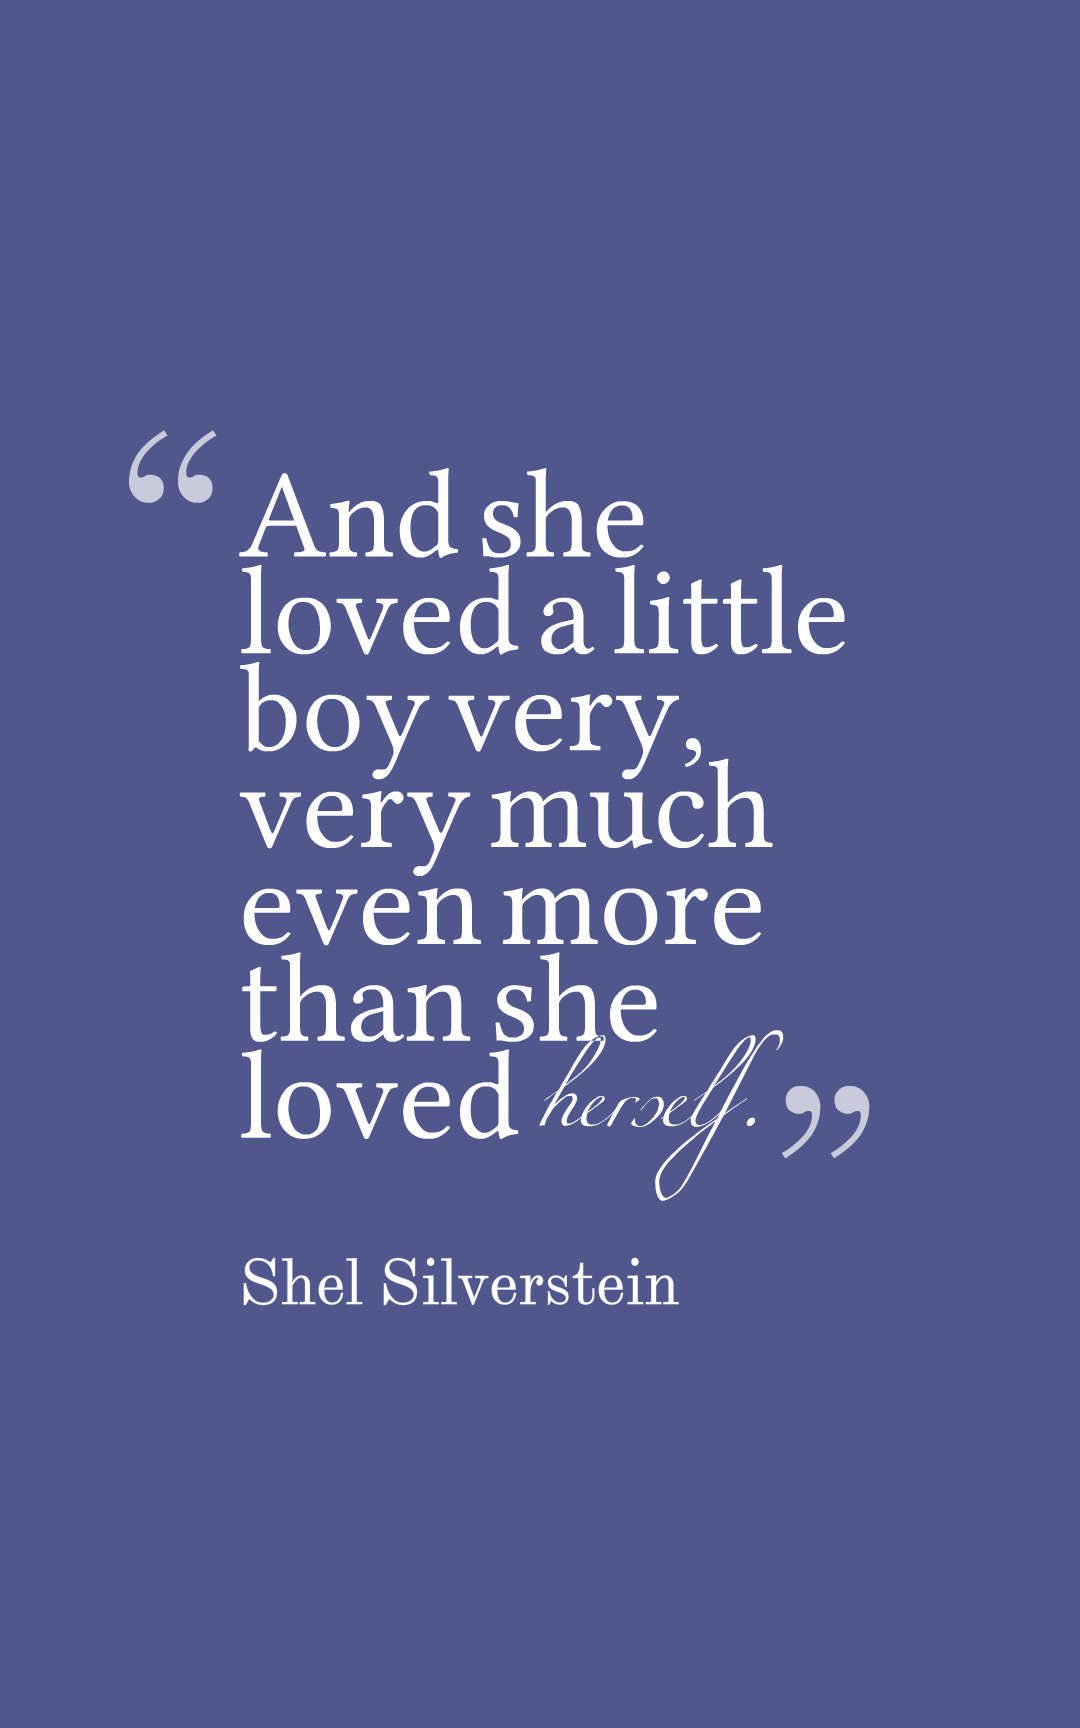 And she loved a little boy very, very much – even more than she loved herself.